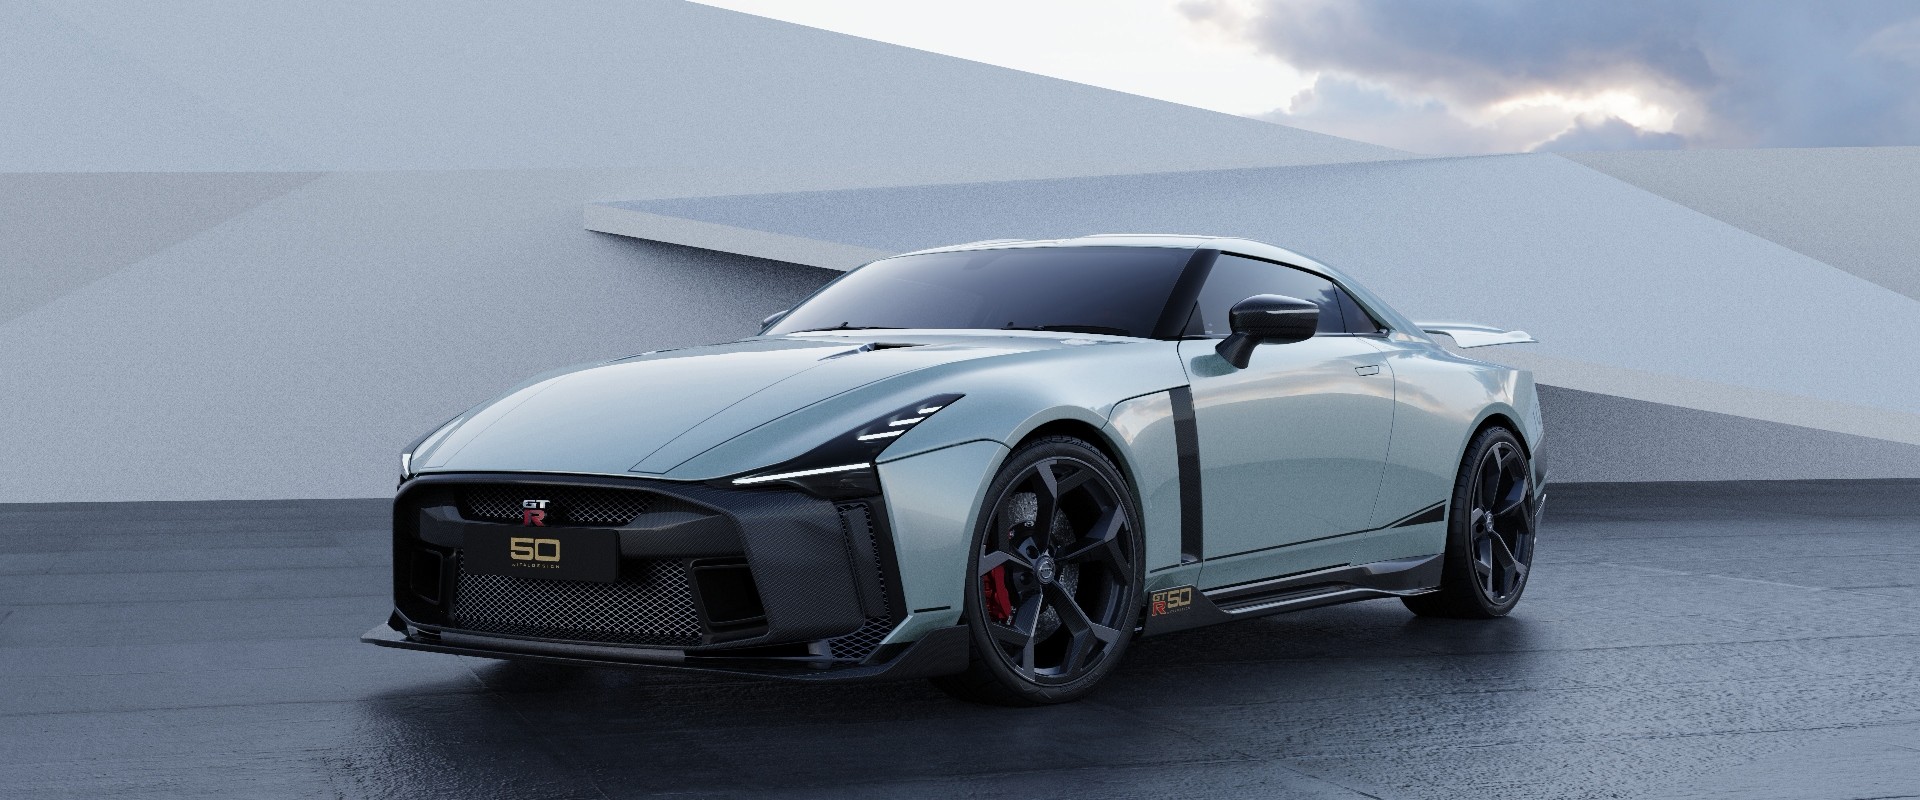 https://s1.cdn.autoevolution.com/images/news/gallery/next-generation-nissan-gt-r-rendered-looks-like-a-mid-engined-supercar_10.jpg